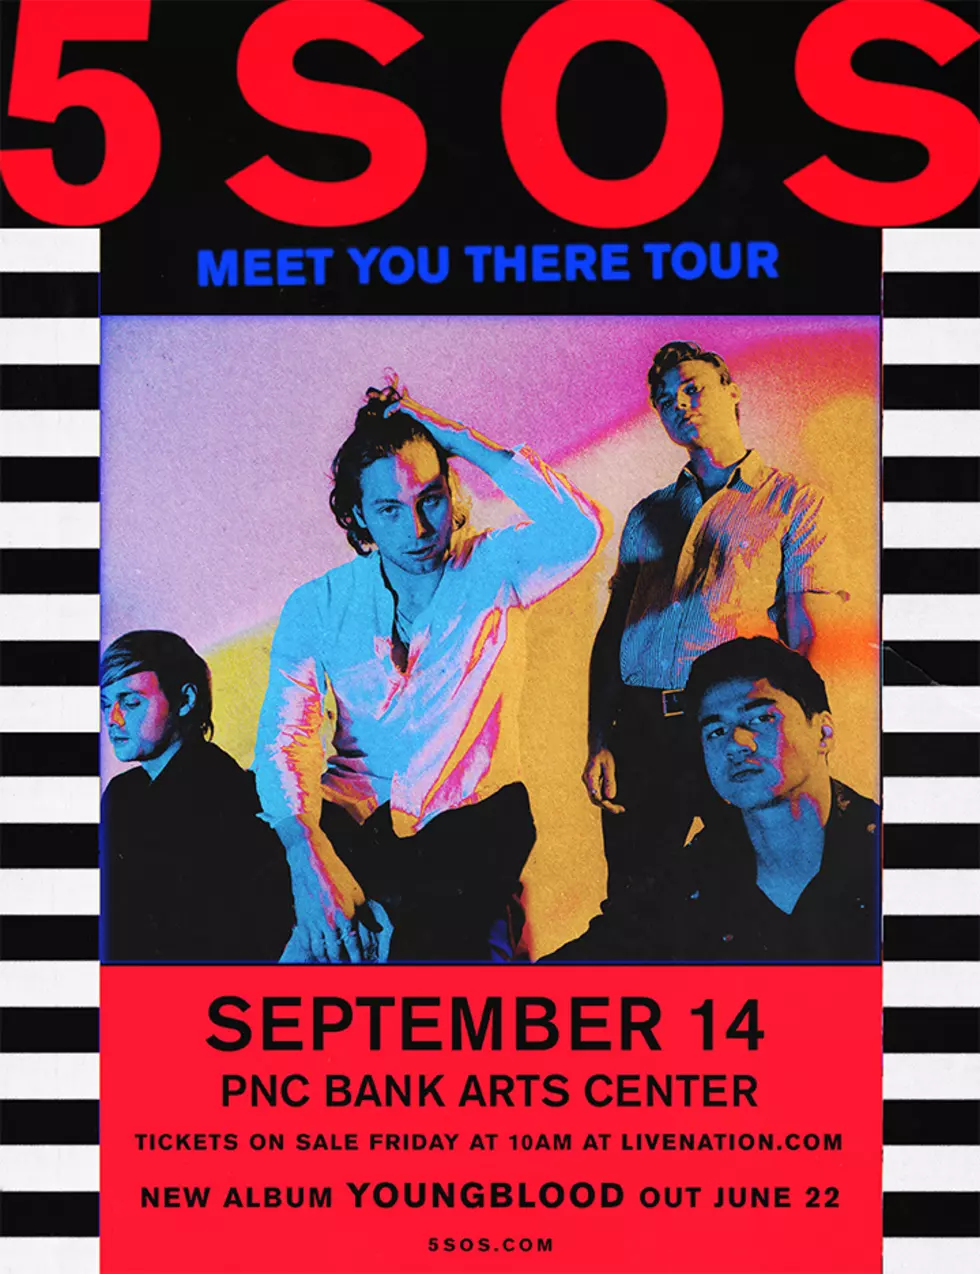 5SOS "Meet You There Tour" Hits MICHIGAN & We've Got Tickets!